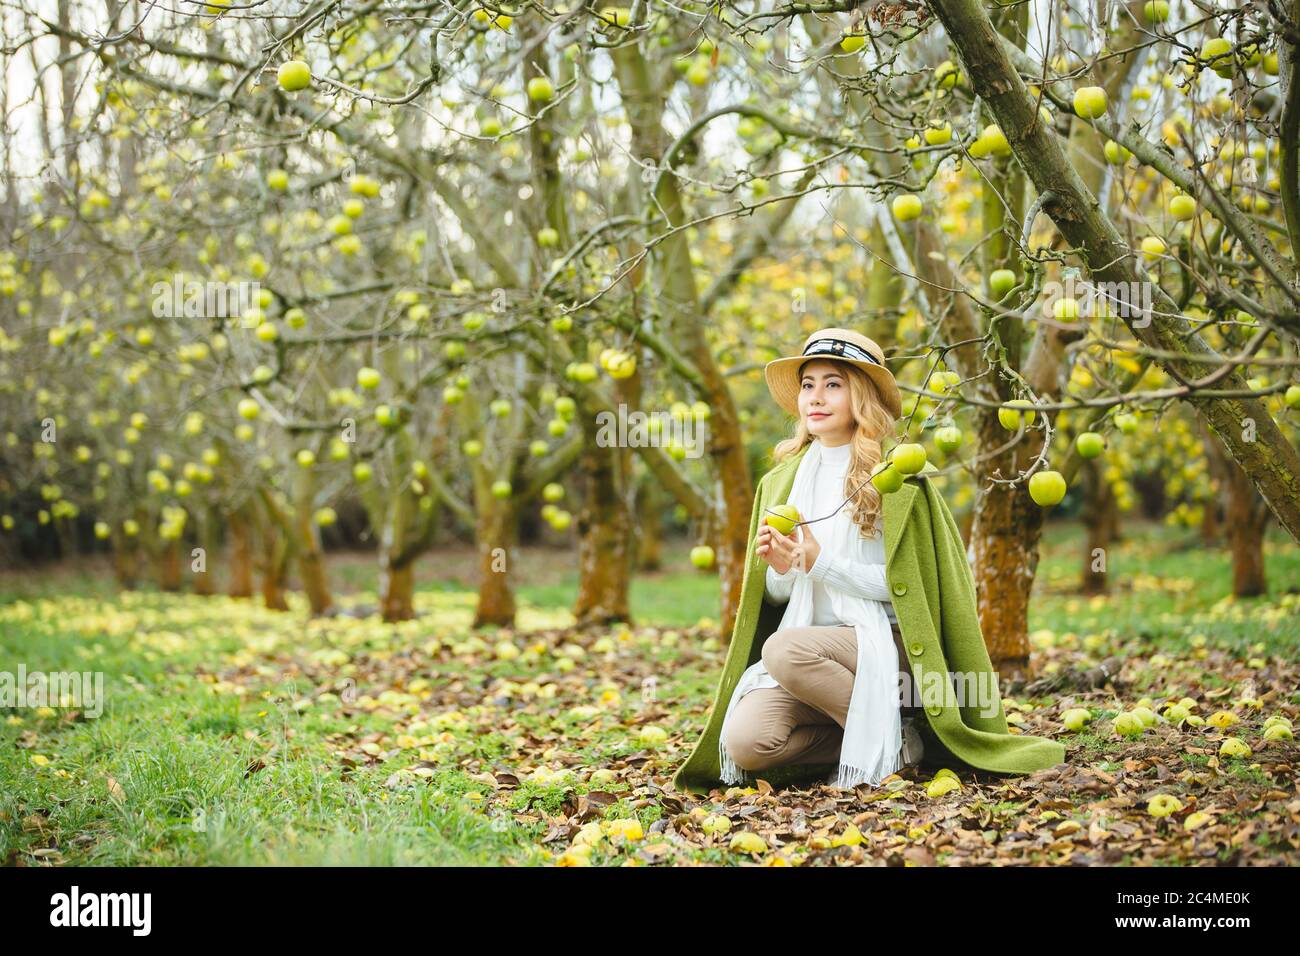 Beautiful asian woman picking a green apple in apple orchard. Stock Photo